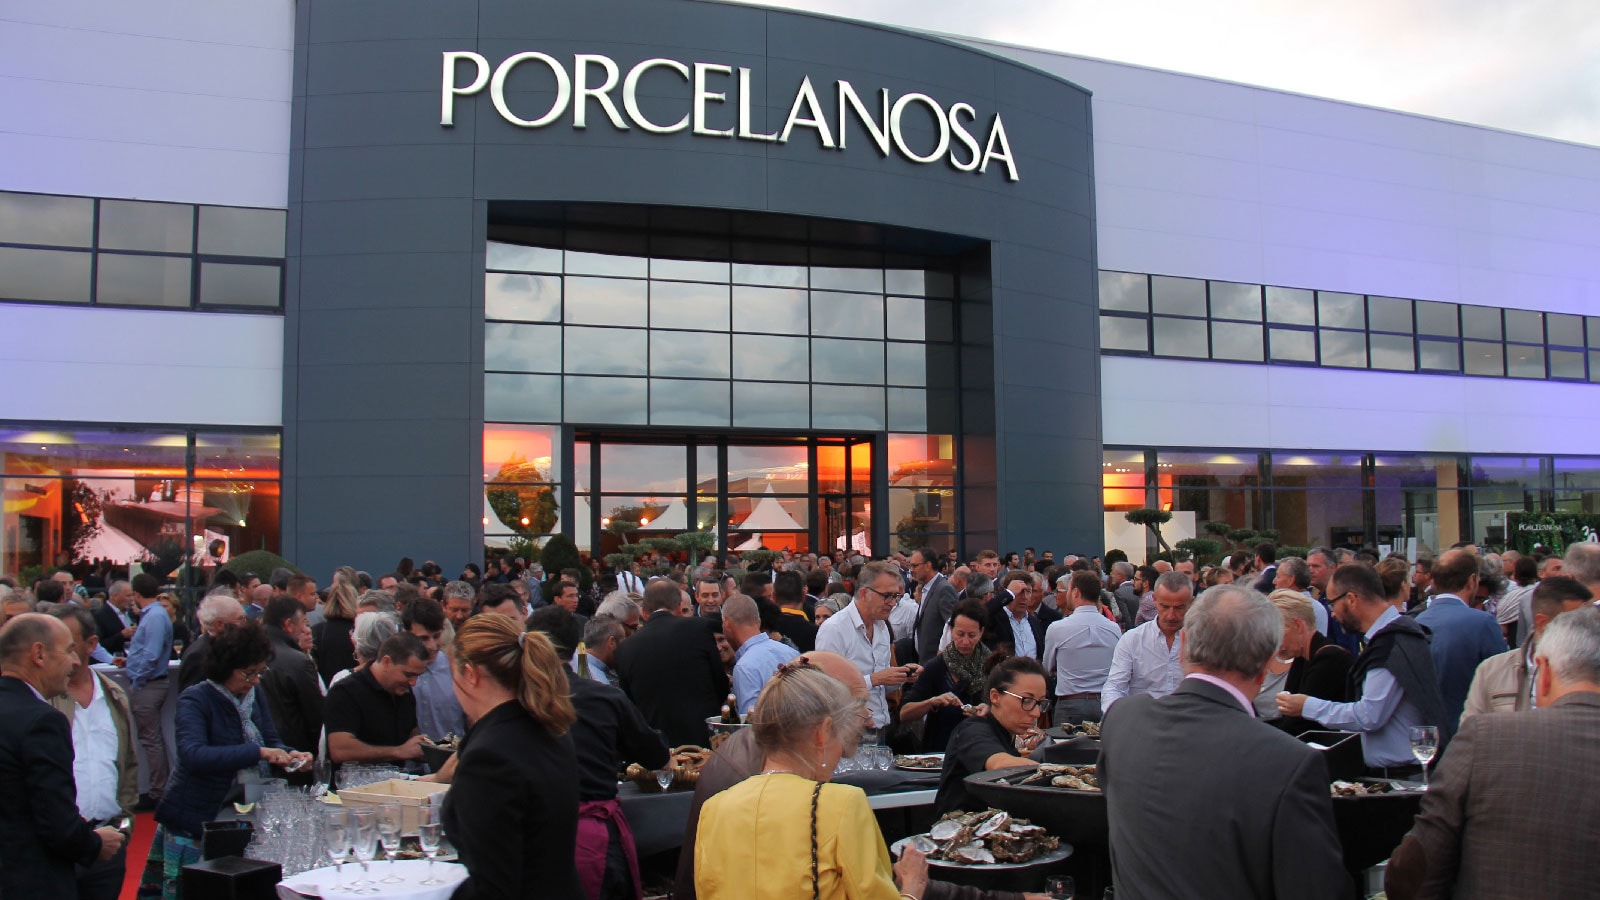 The PORCELANOSA Grupo celebrates its 30th anniversary in Strasbourg and in Nantes, France